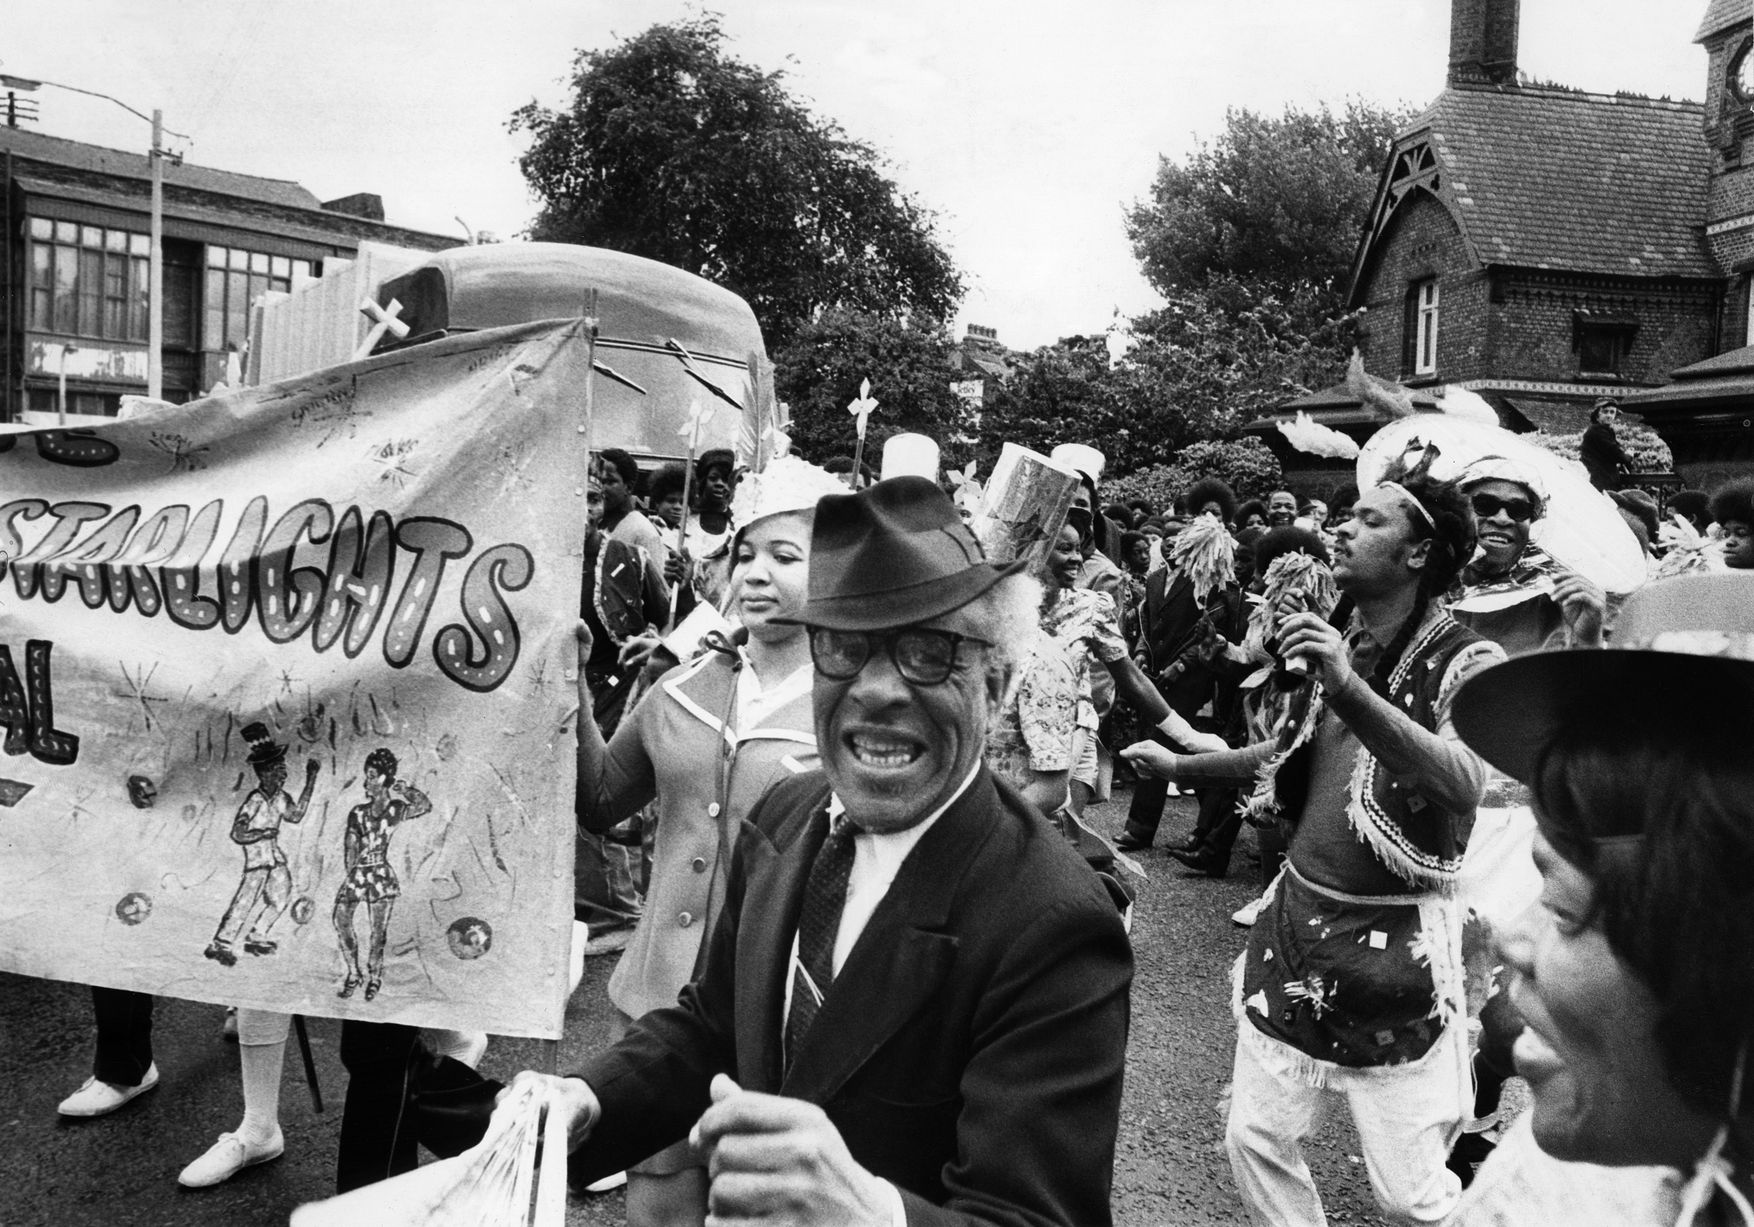 Black and white photo of the carnival procession. Man smiling wearing a hat. Steel bands and brightly dressed Indian dancers lead the way for the traditional lorry borne floats in the Moss Side procession